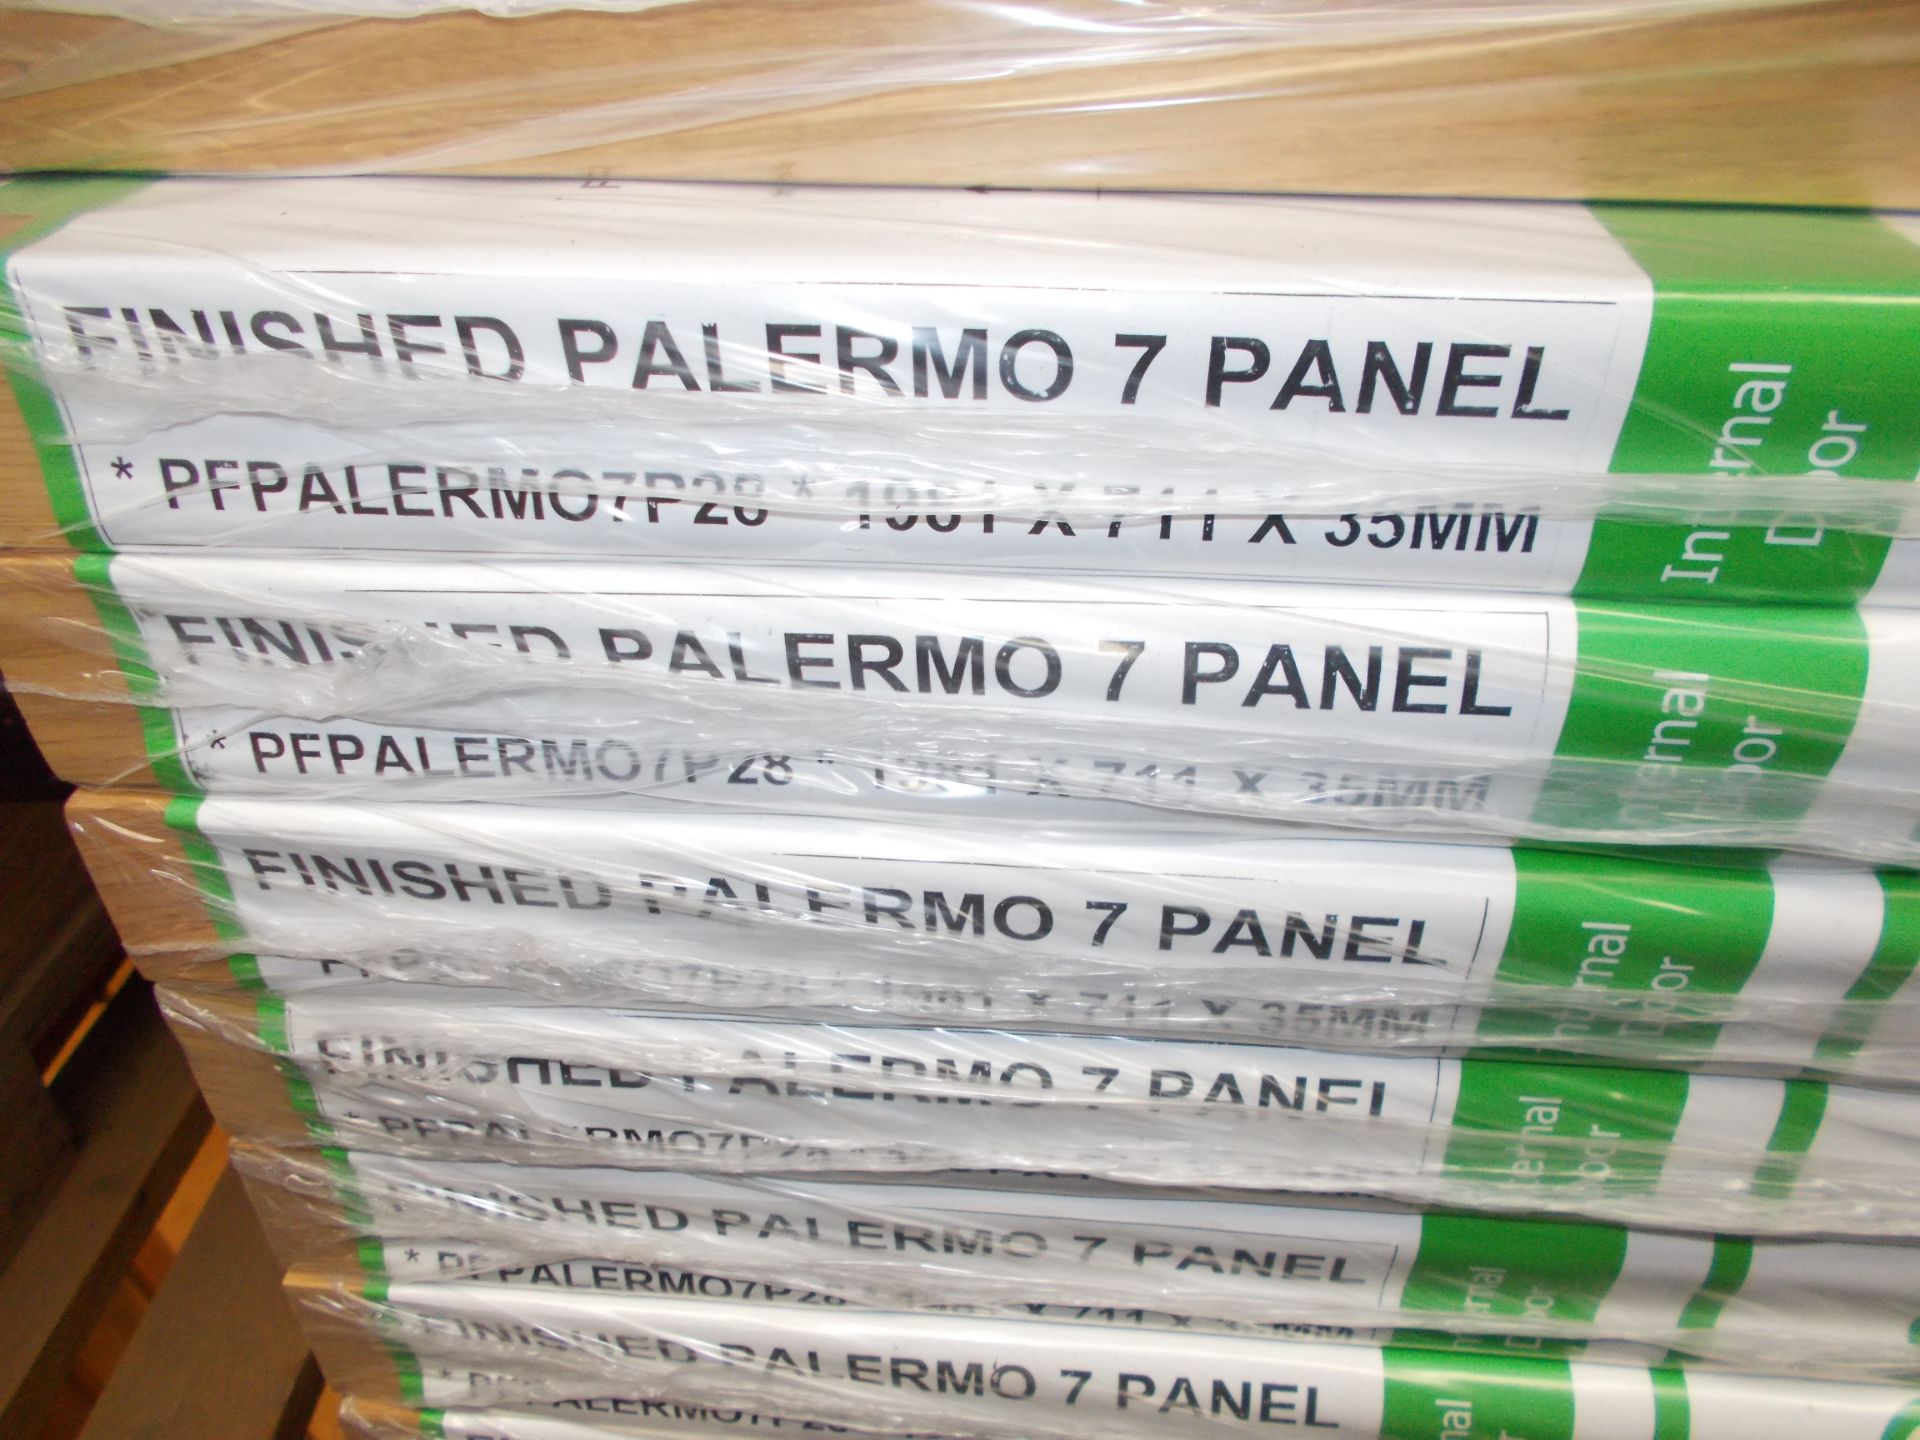 6 x Finished Palermo 7 Panel Internal Door PFPALERMO7P28 1981x711x35mm - Lots to be handed out in - Image 4 of 4